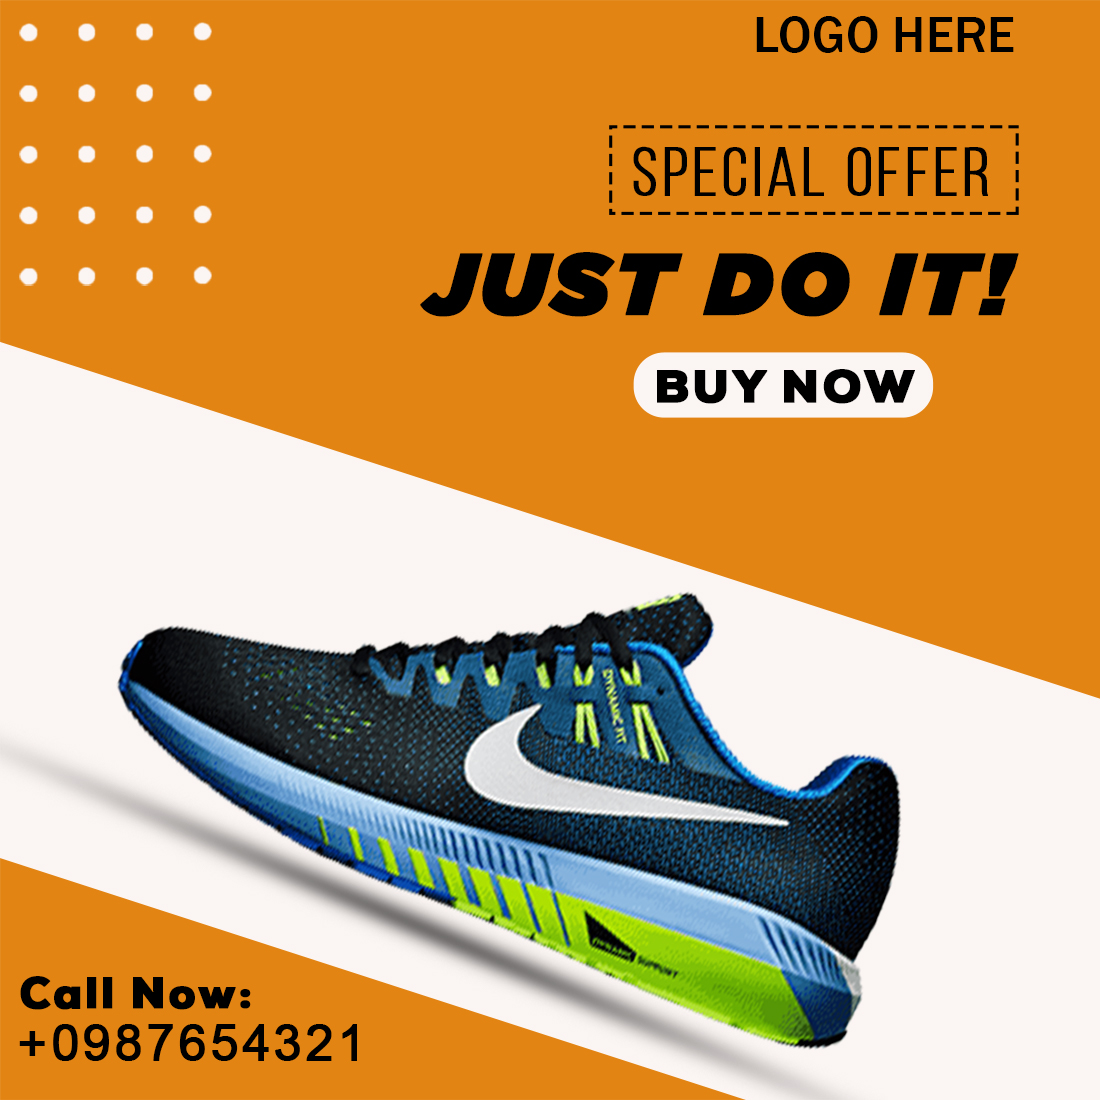 Social Media Post Design for Sports shoes preview image.